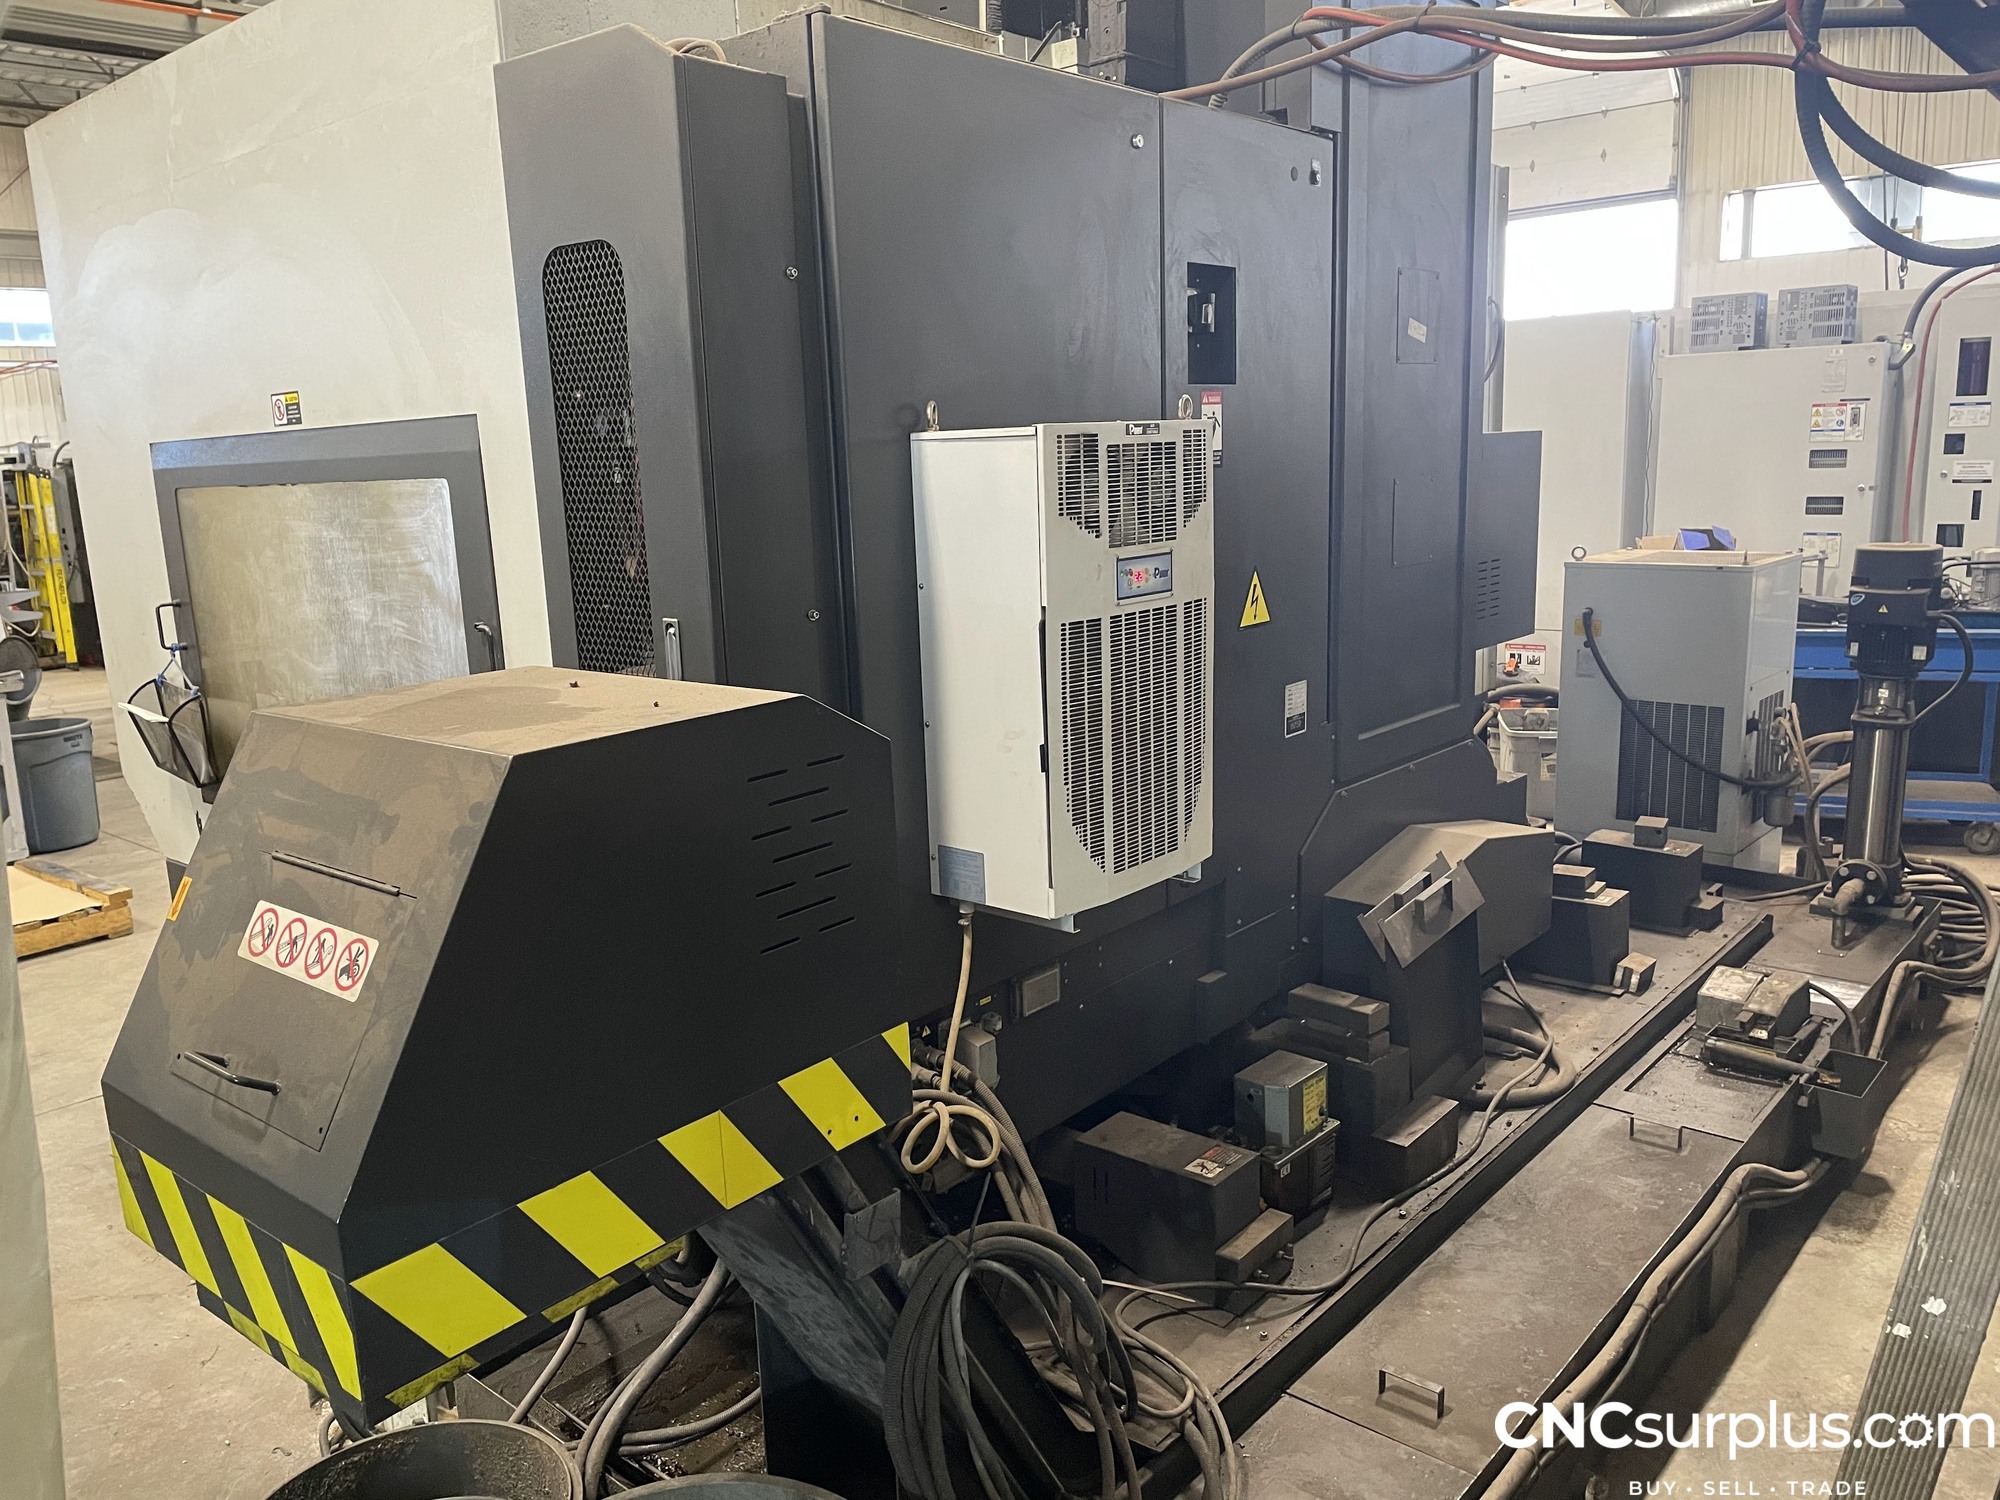 2013 LEADWELL V-60I Vertical Machining Centers | CNCsurplus, A Div. of Comtex Leasing Corp.